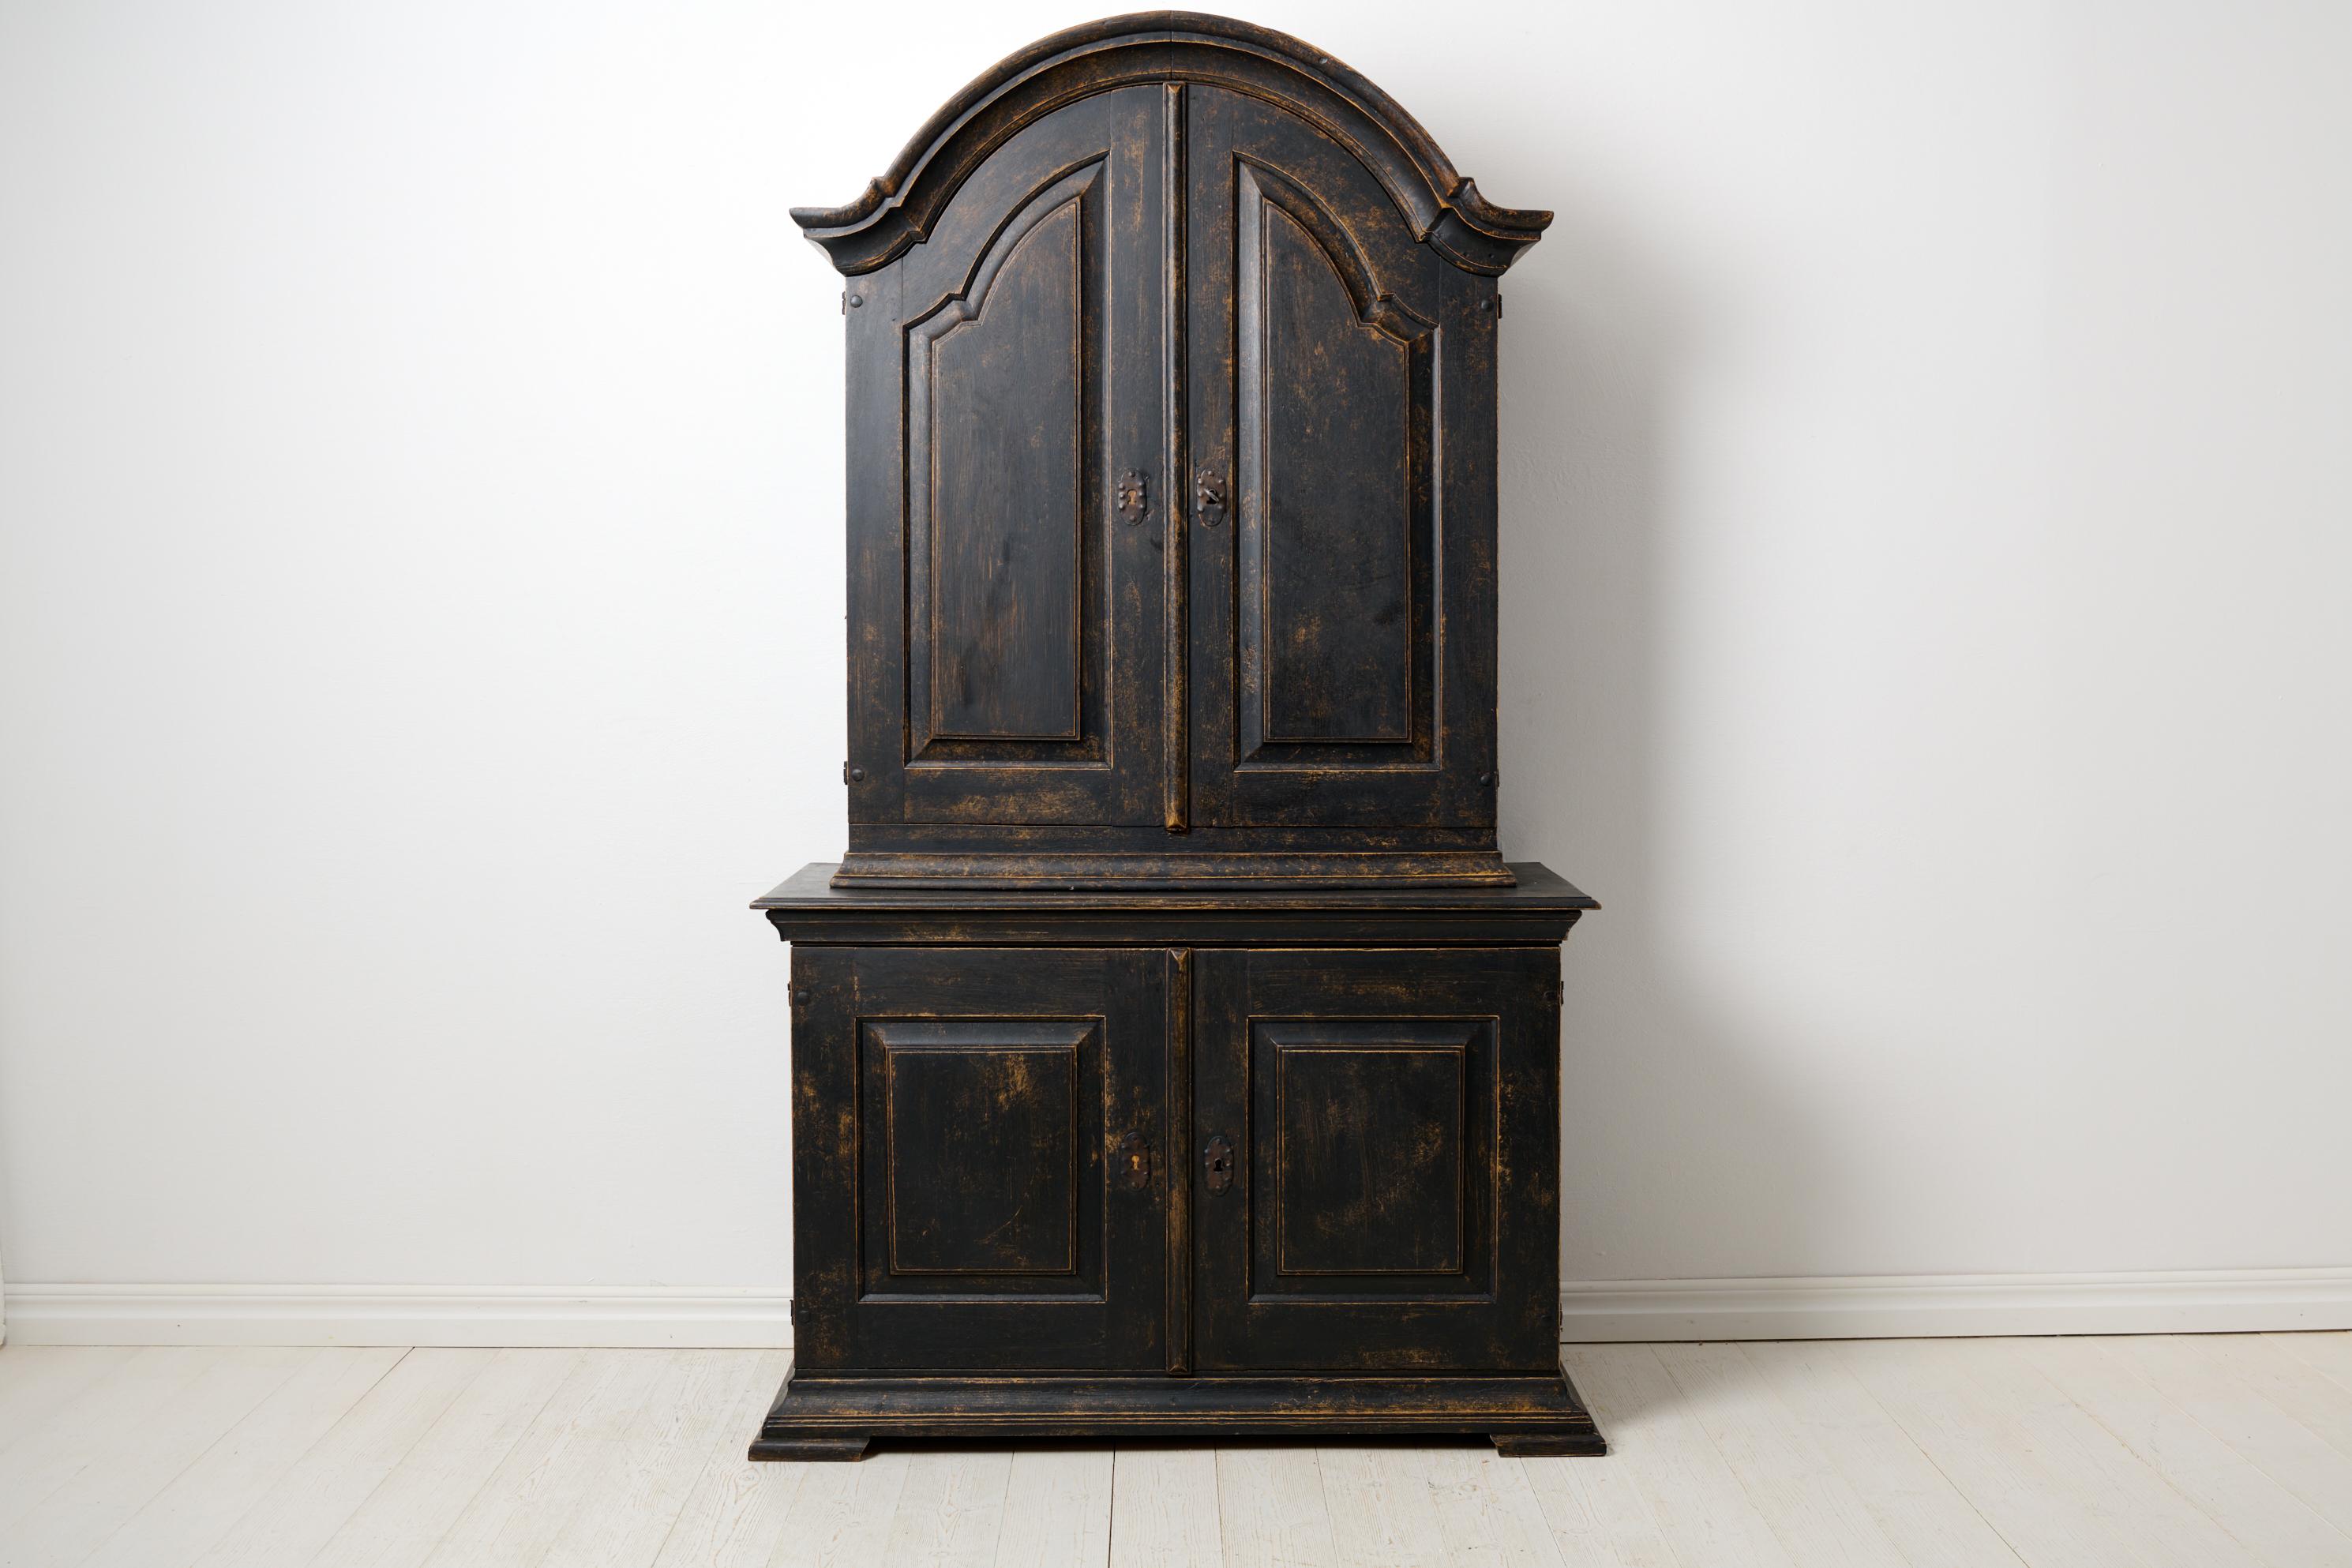 Antique Swedish rococo cabinet from around 1780. The cabinet is made in solid oak with distressed black paint. Made in two parts with the original and functional lock and key. The interior is bare wood and always has been. The lower cabinet measures